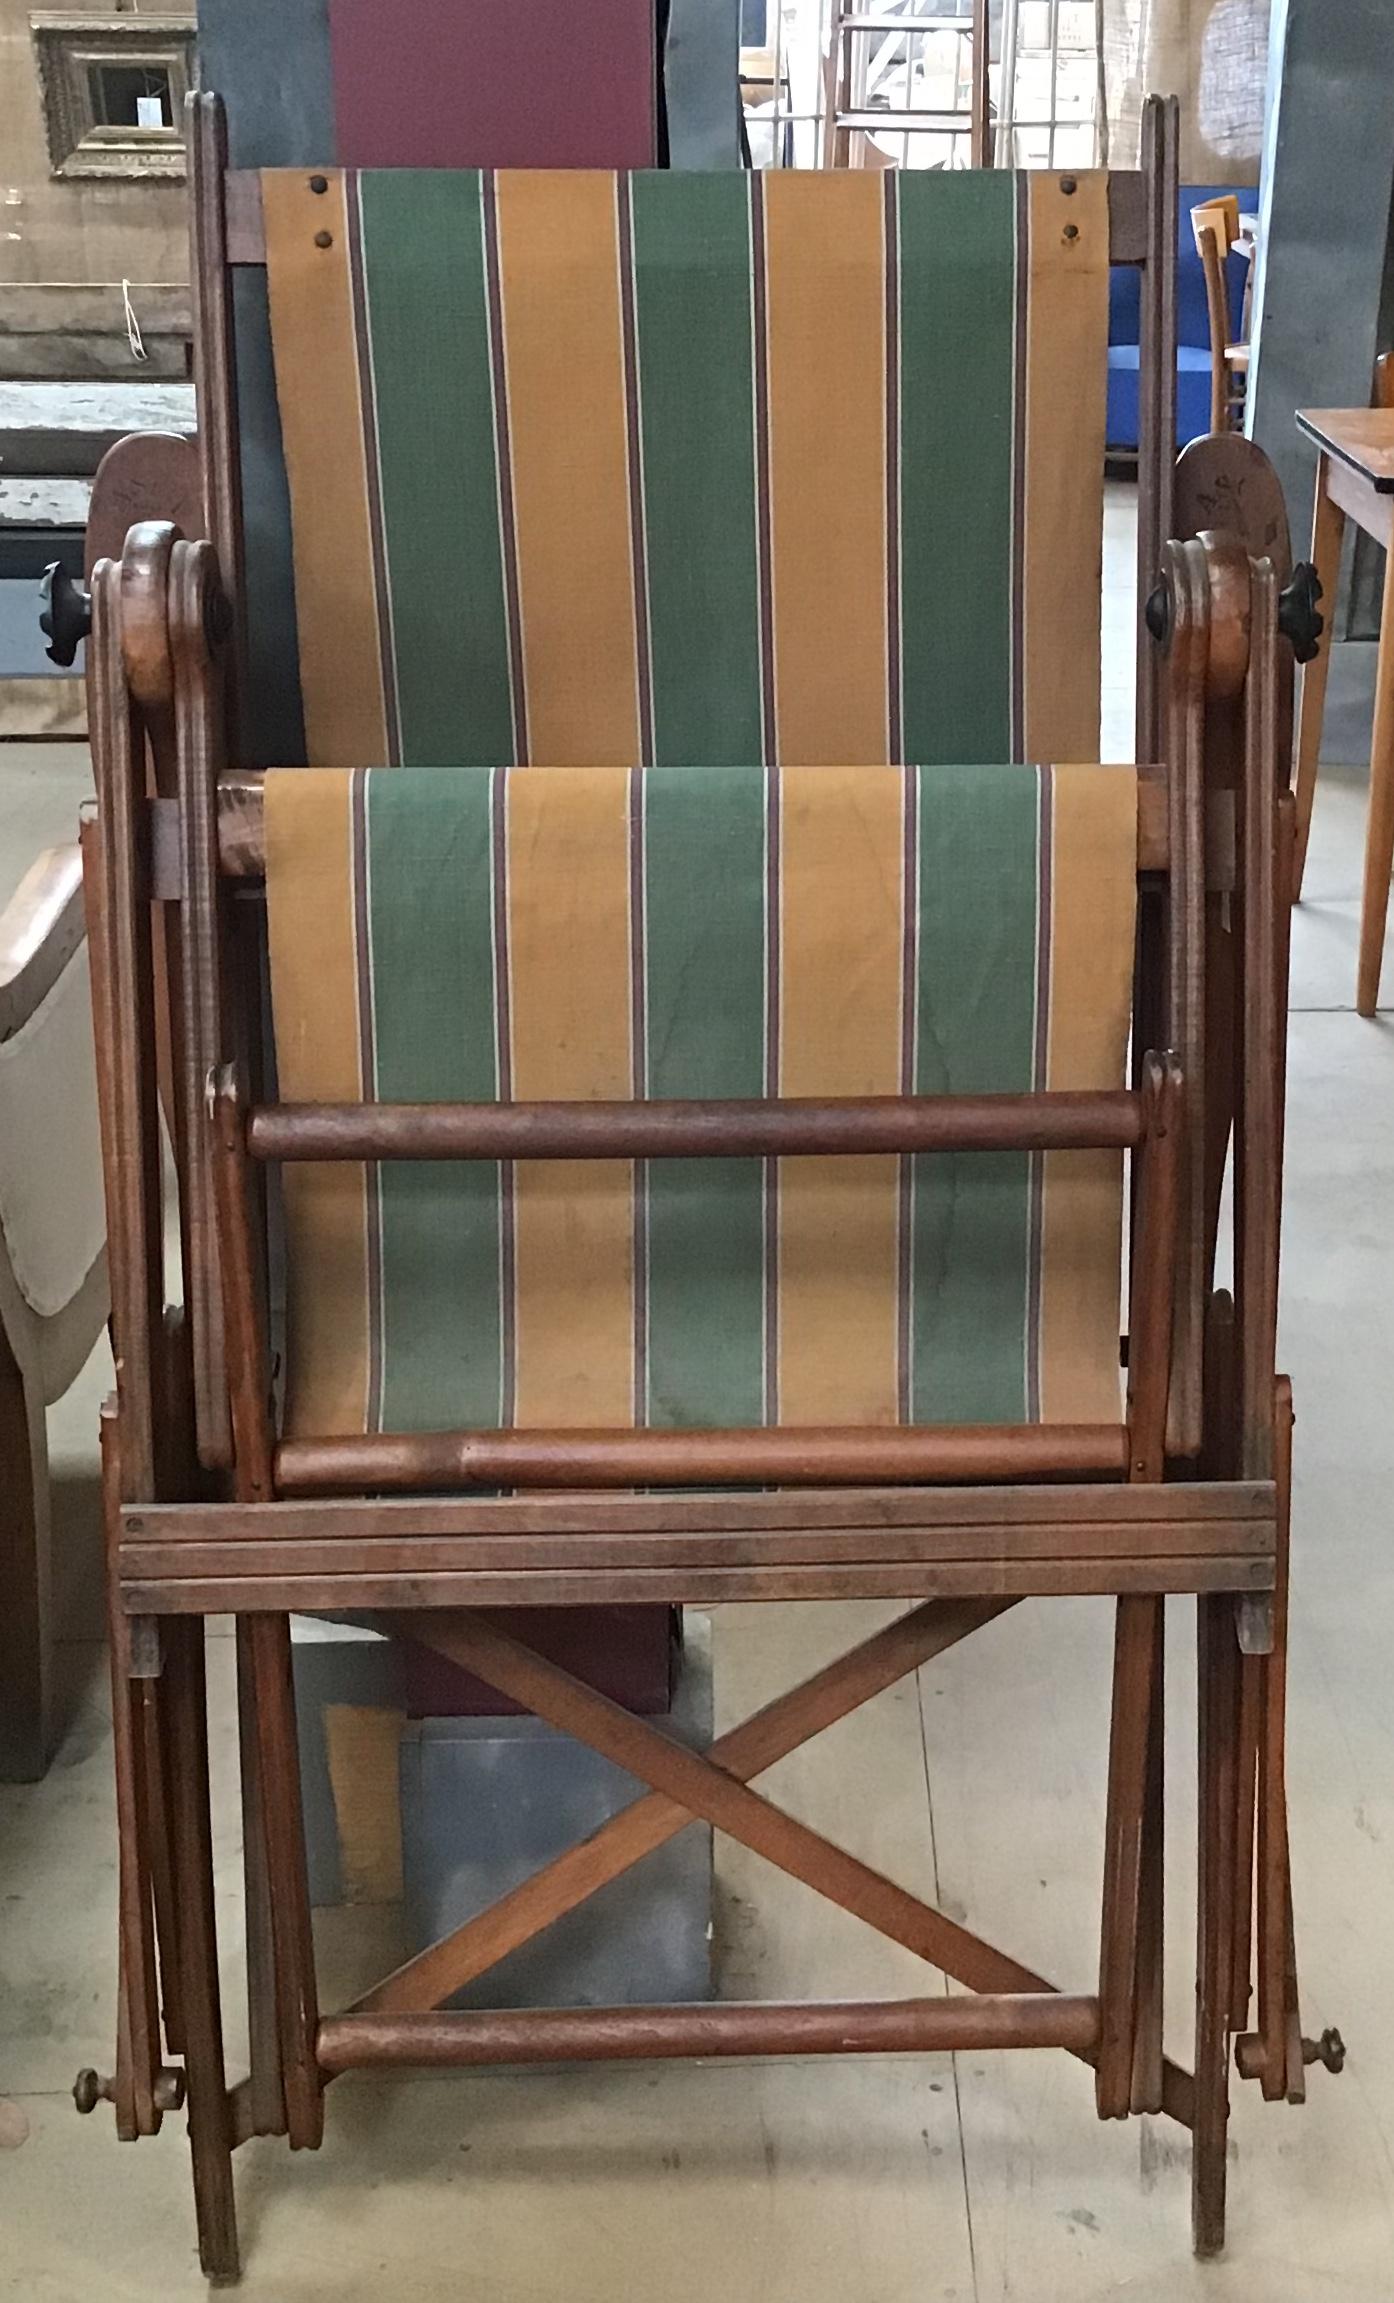 Italian Midcentury Adjustable and Foldable Beach Chair in Walnut from 1960s For Sale 2